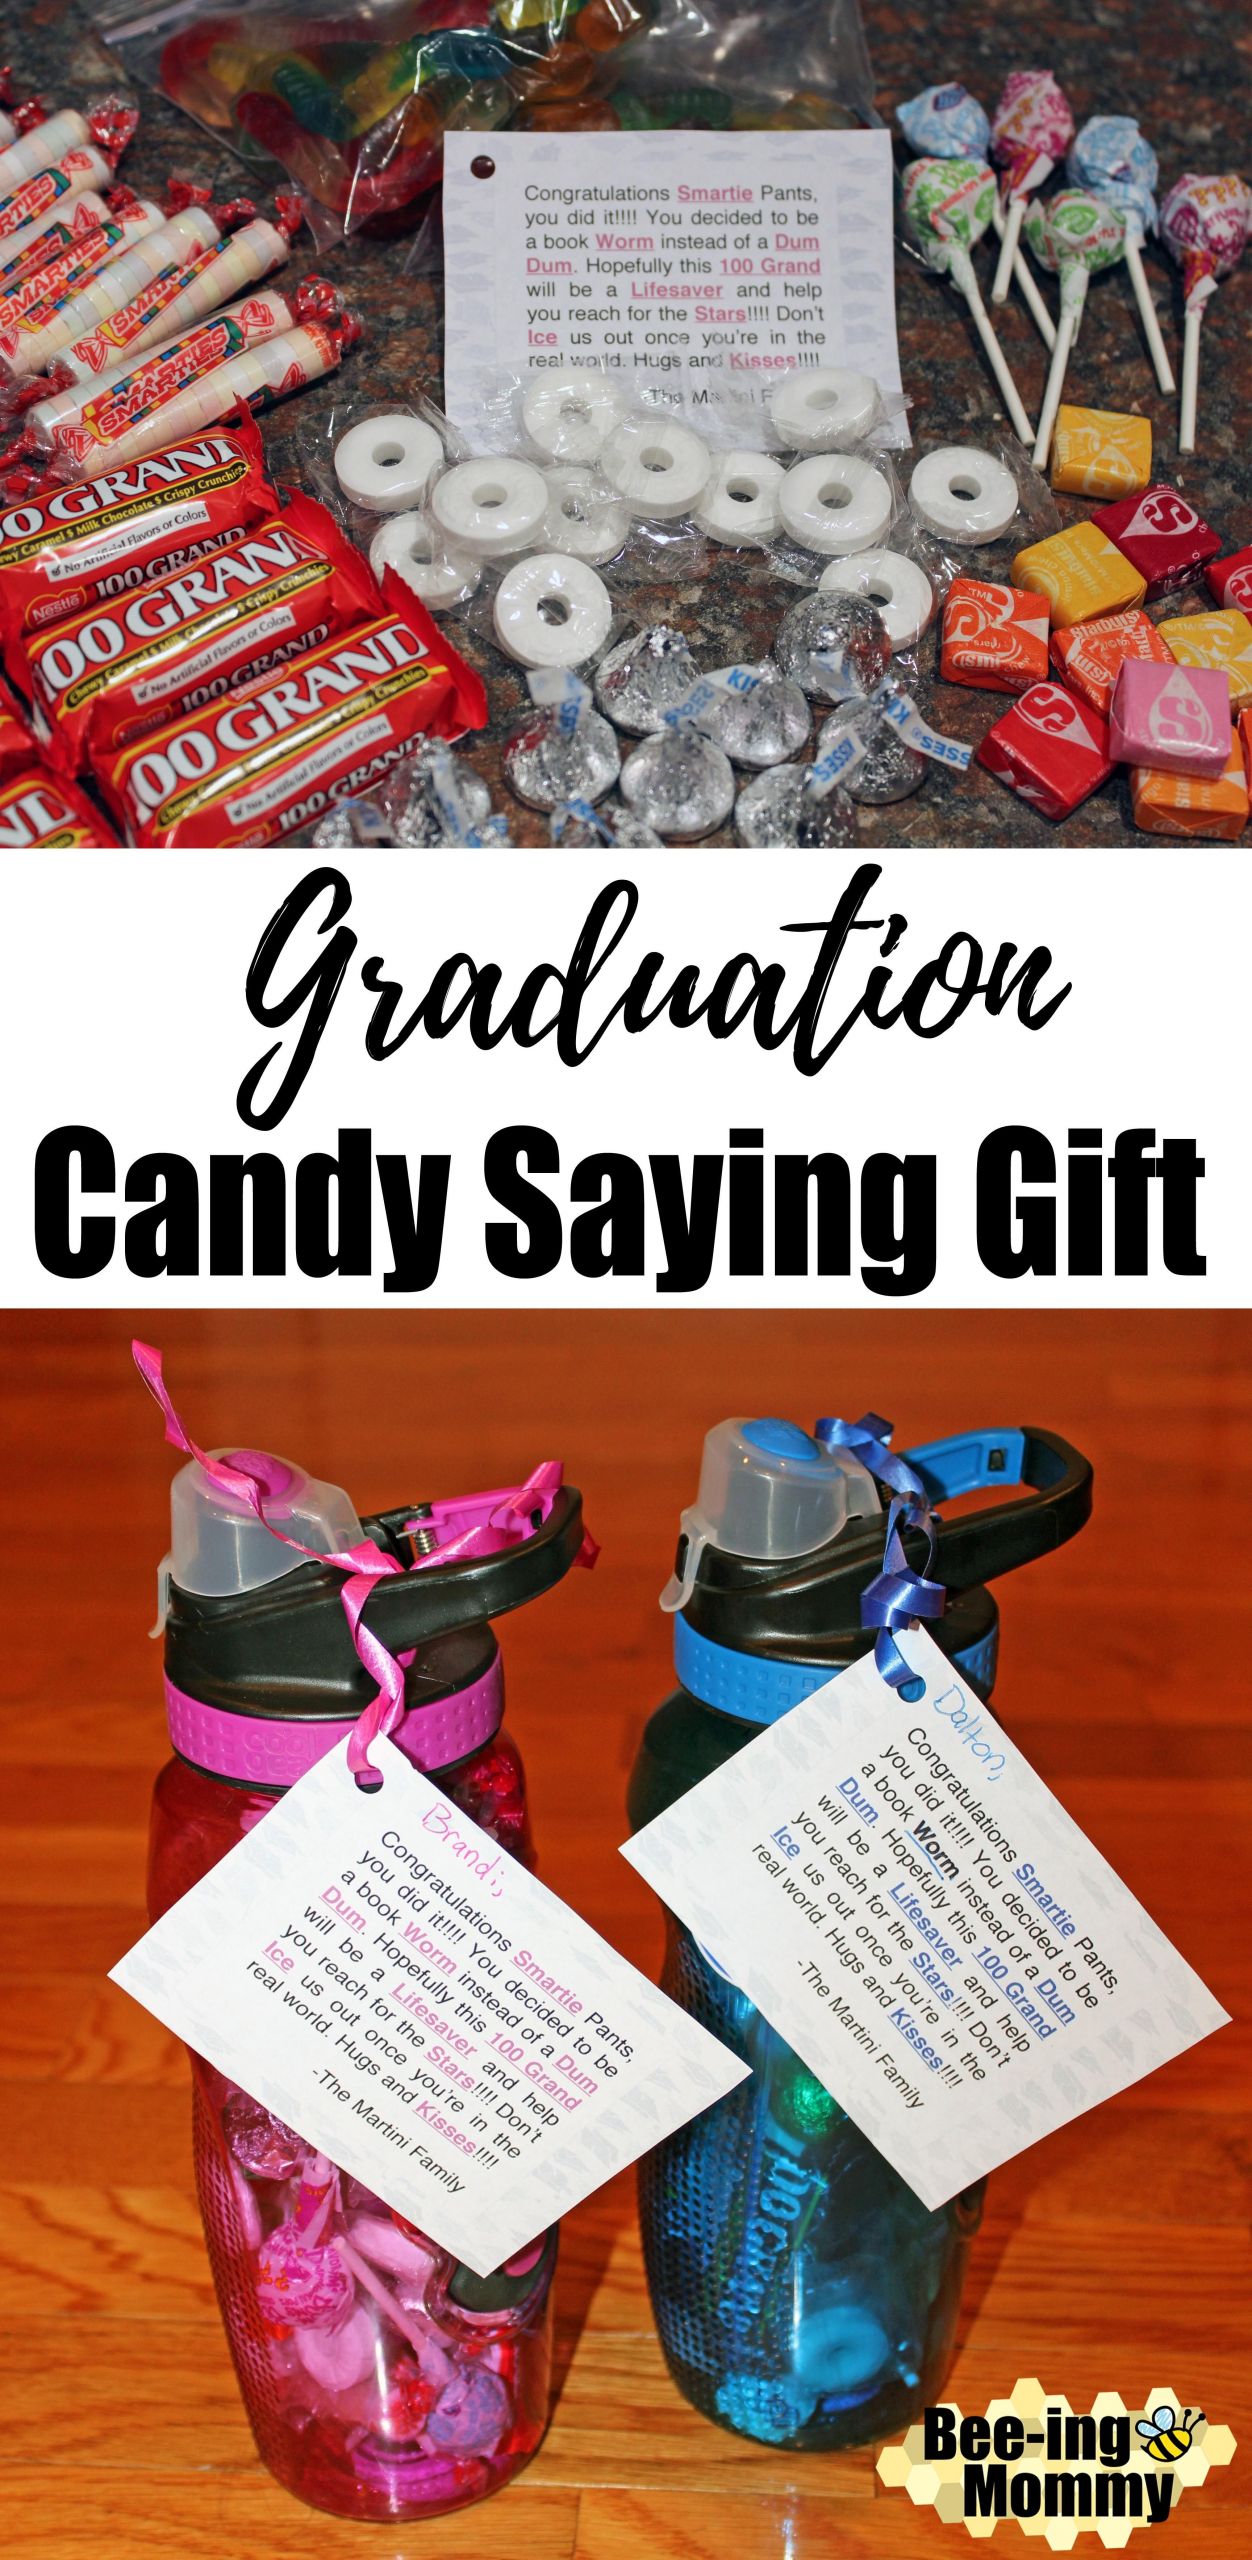 Inexpensive Graduation Gift Ideas
 Graduation Candy Saying Water Bottle Gift